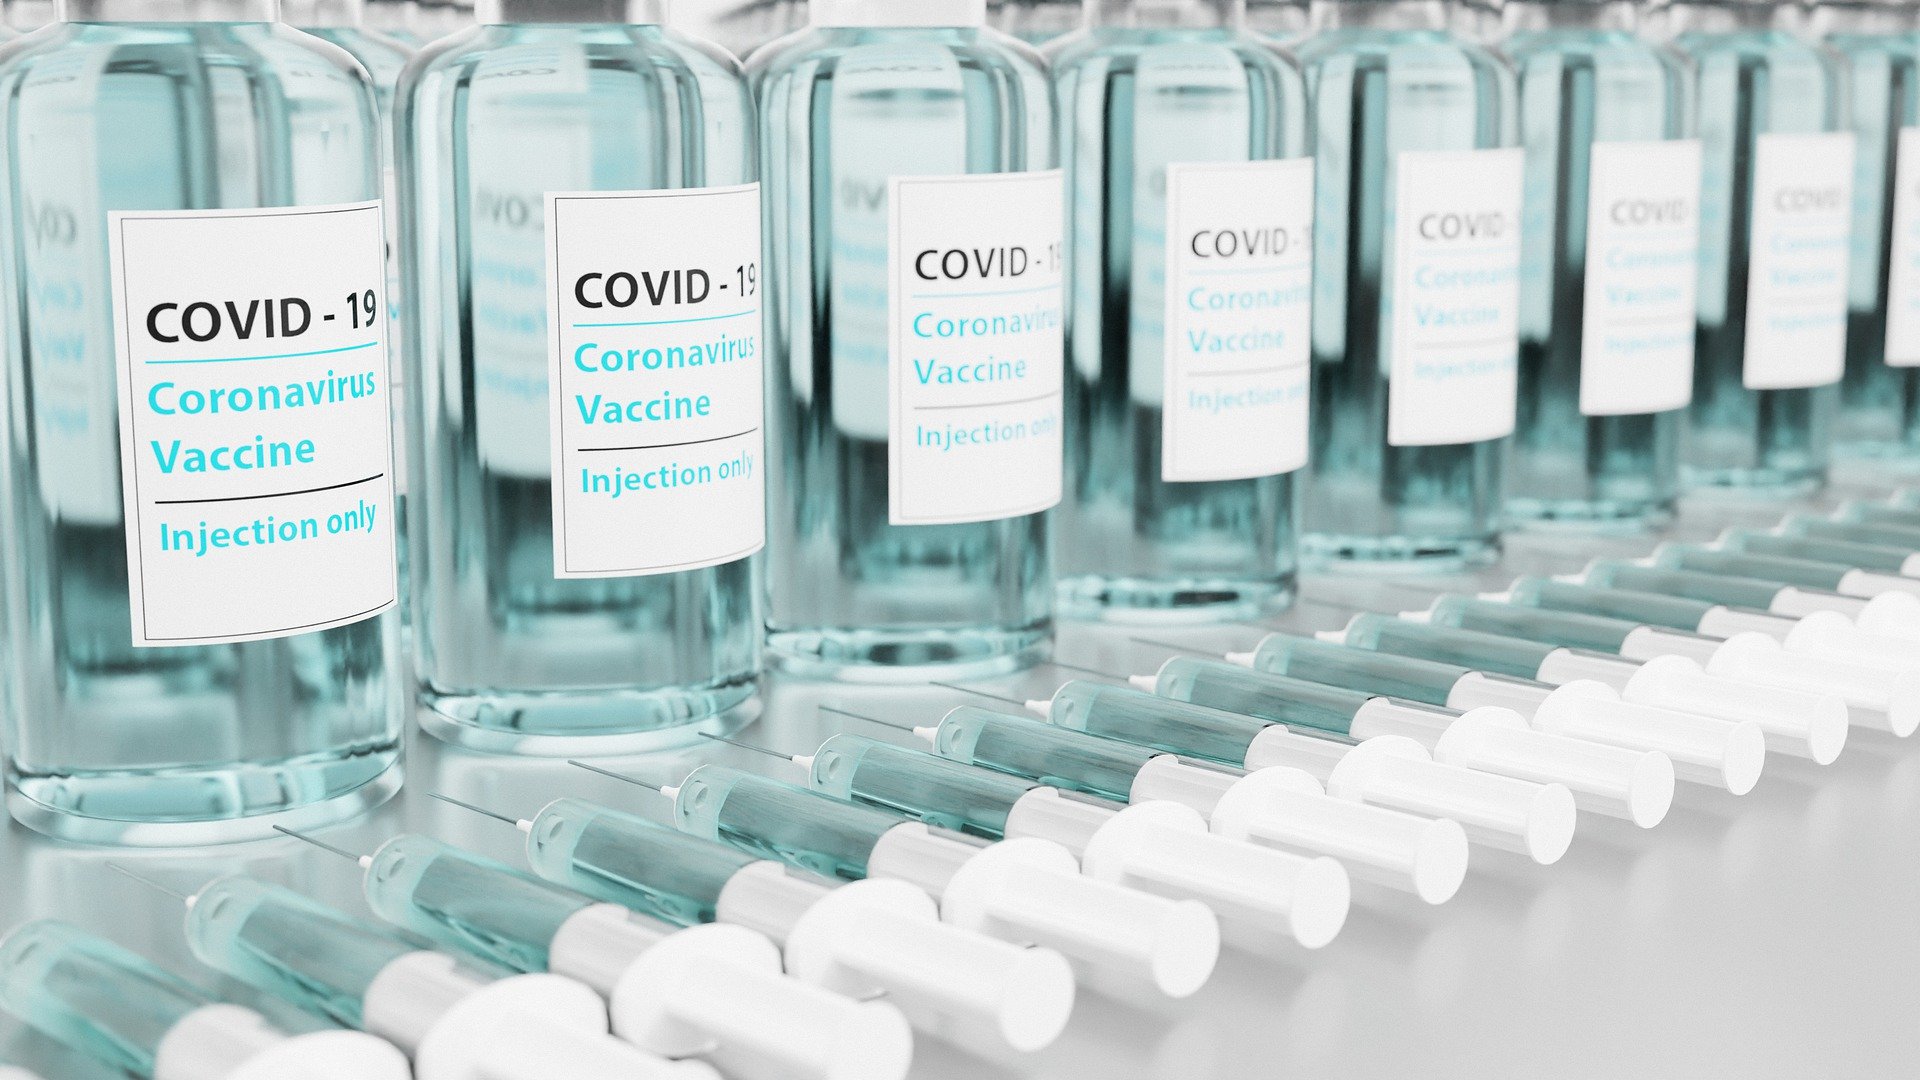 Bottles of covid-19 vaccines